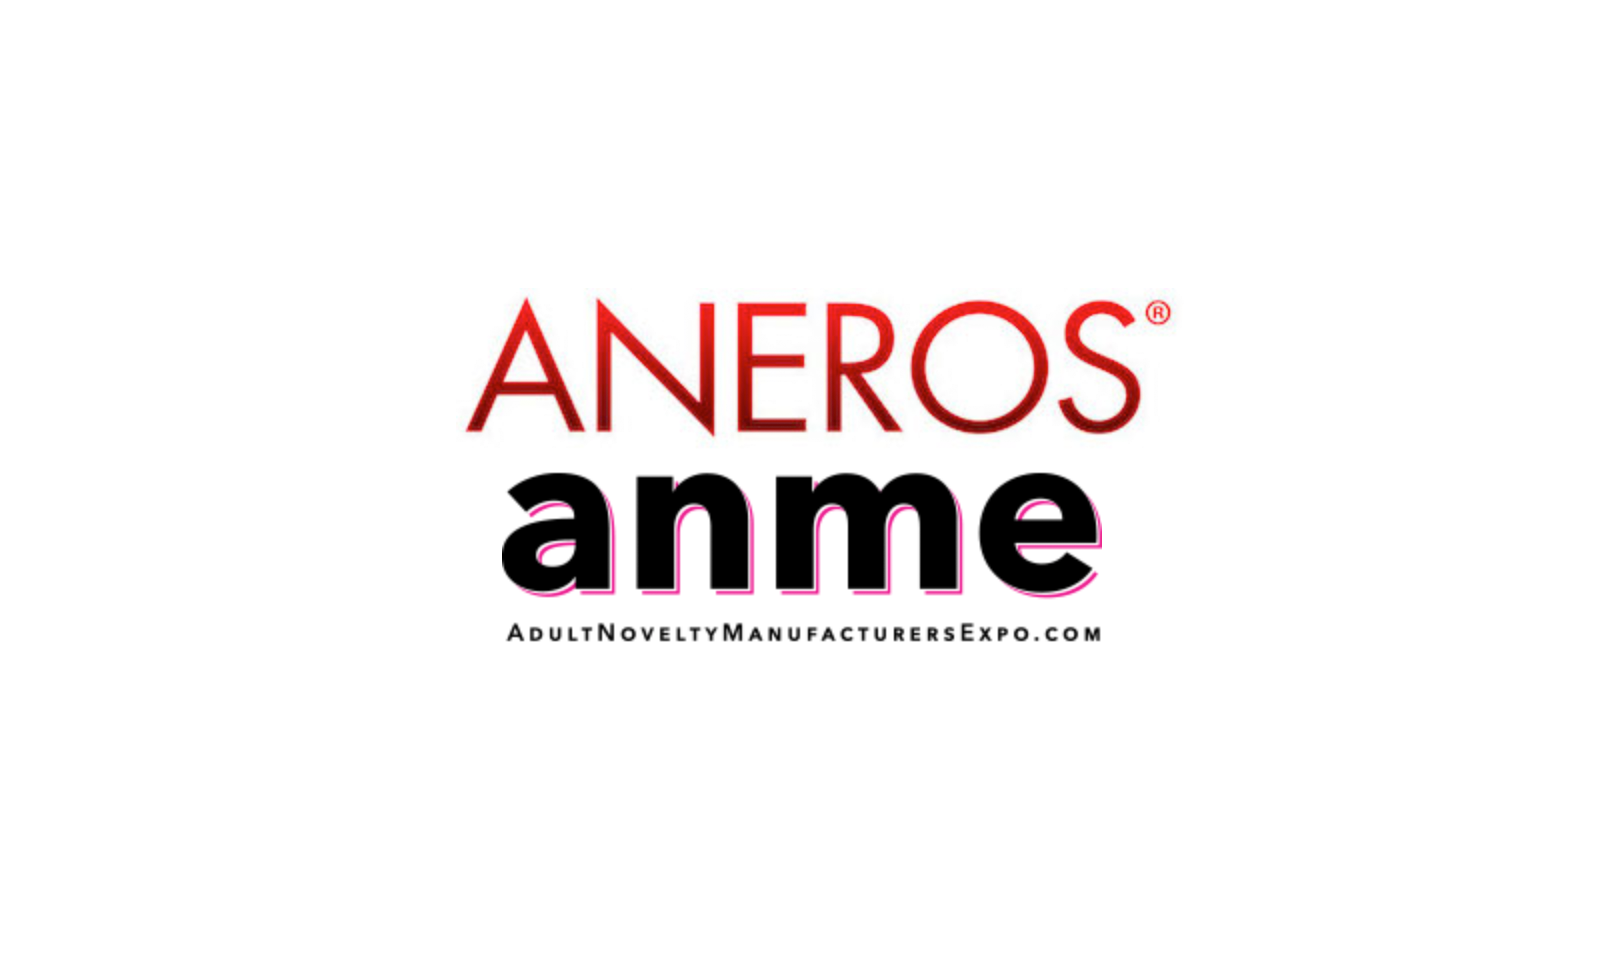 Aneros Reports Successful ANME Showing